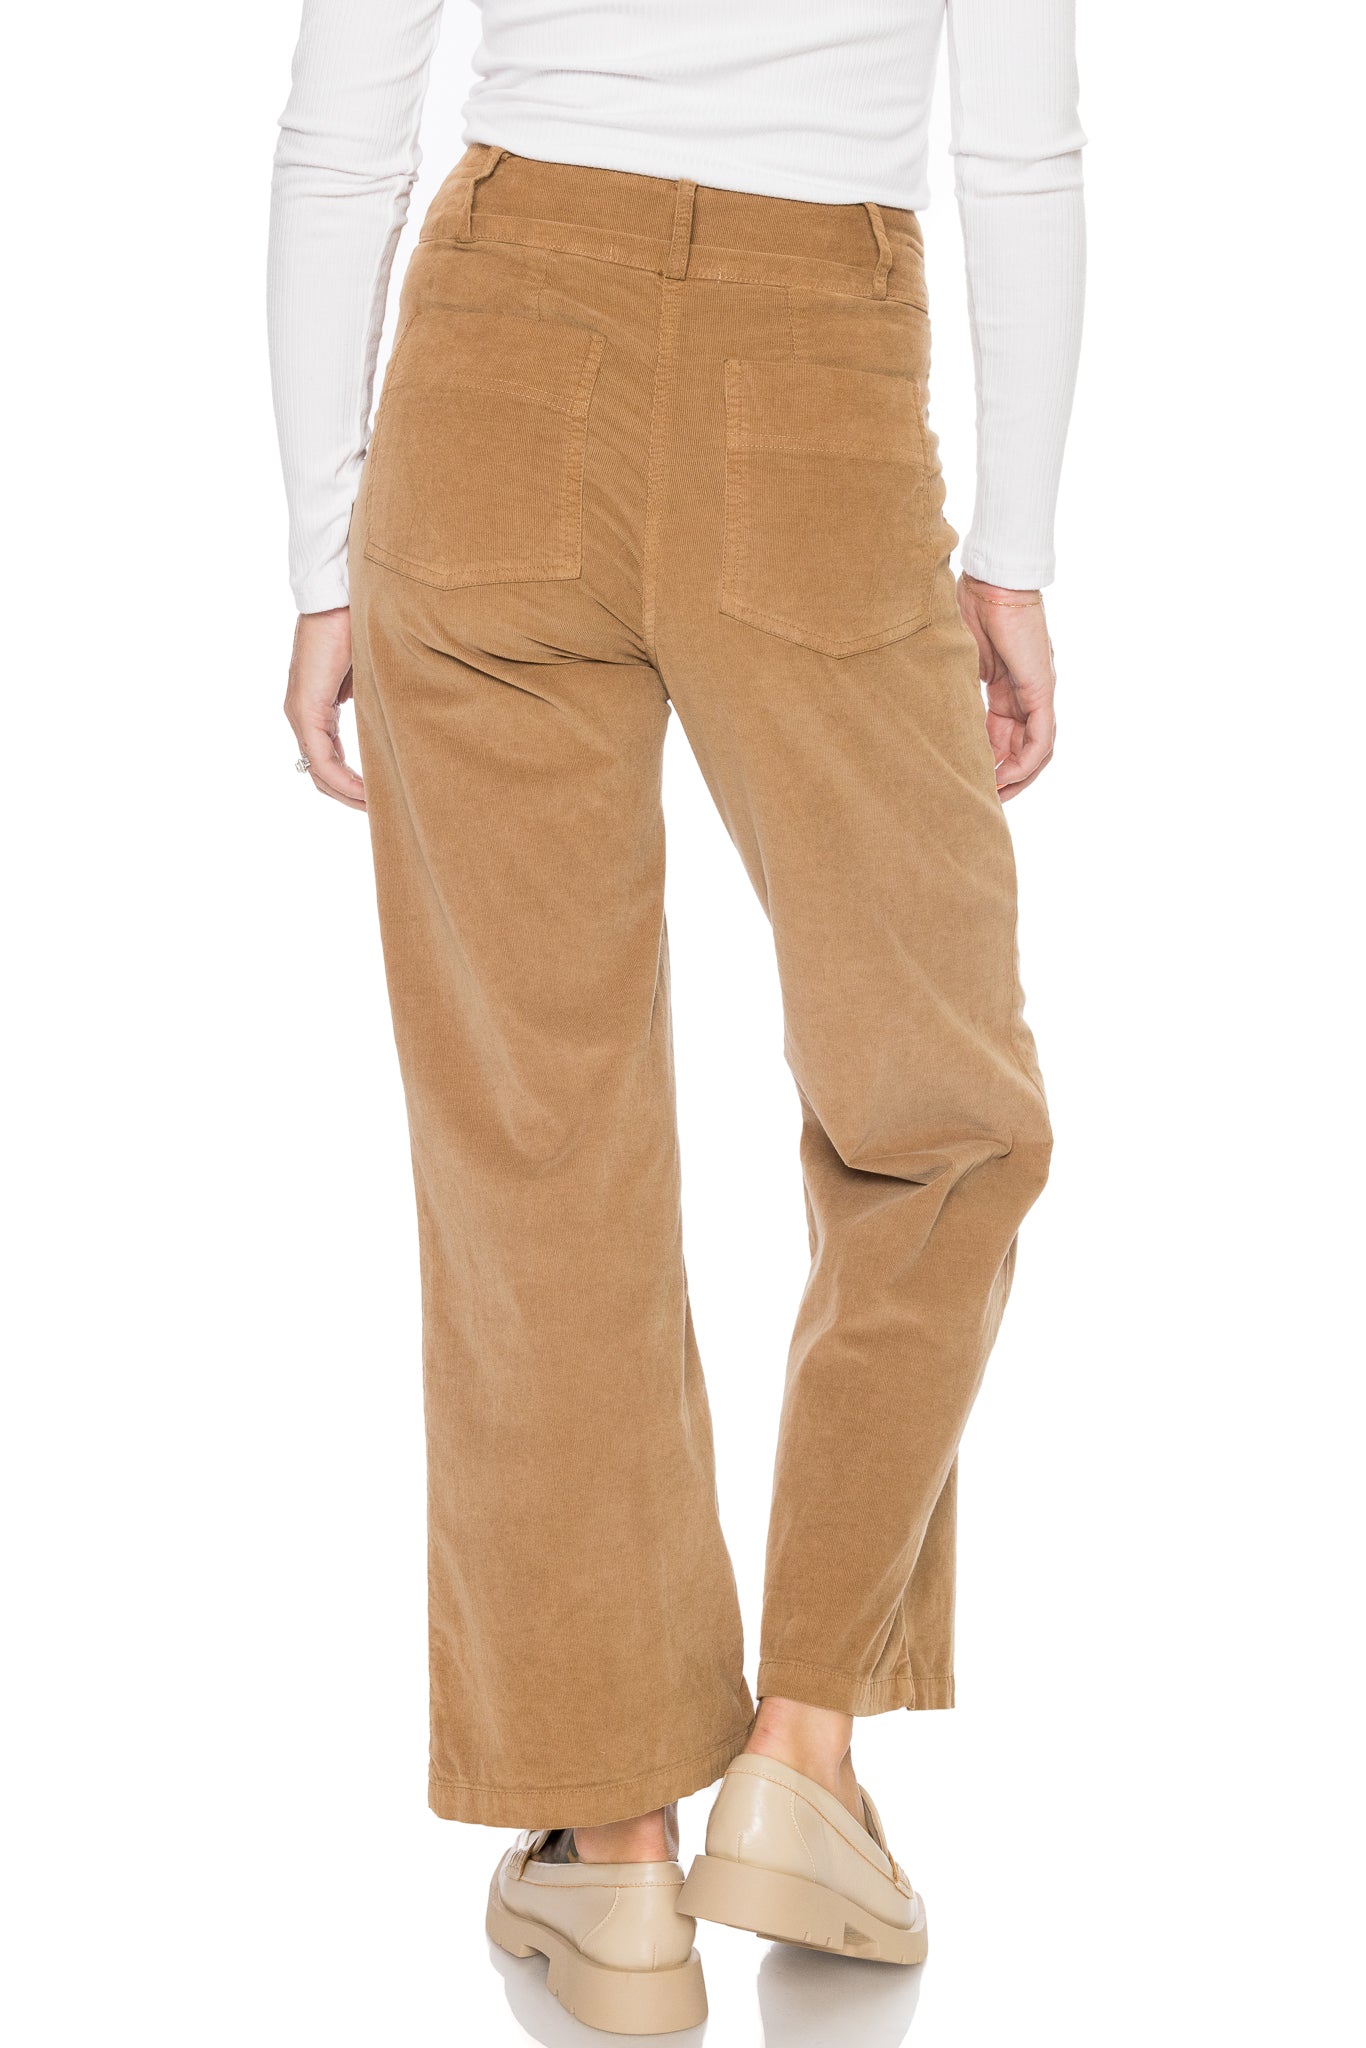 Aria Pants by Self Contrast